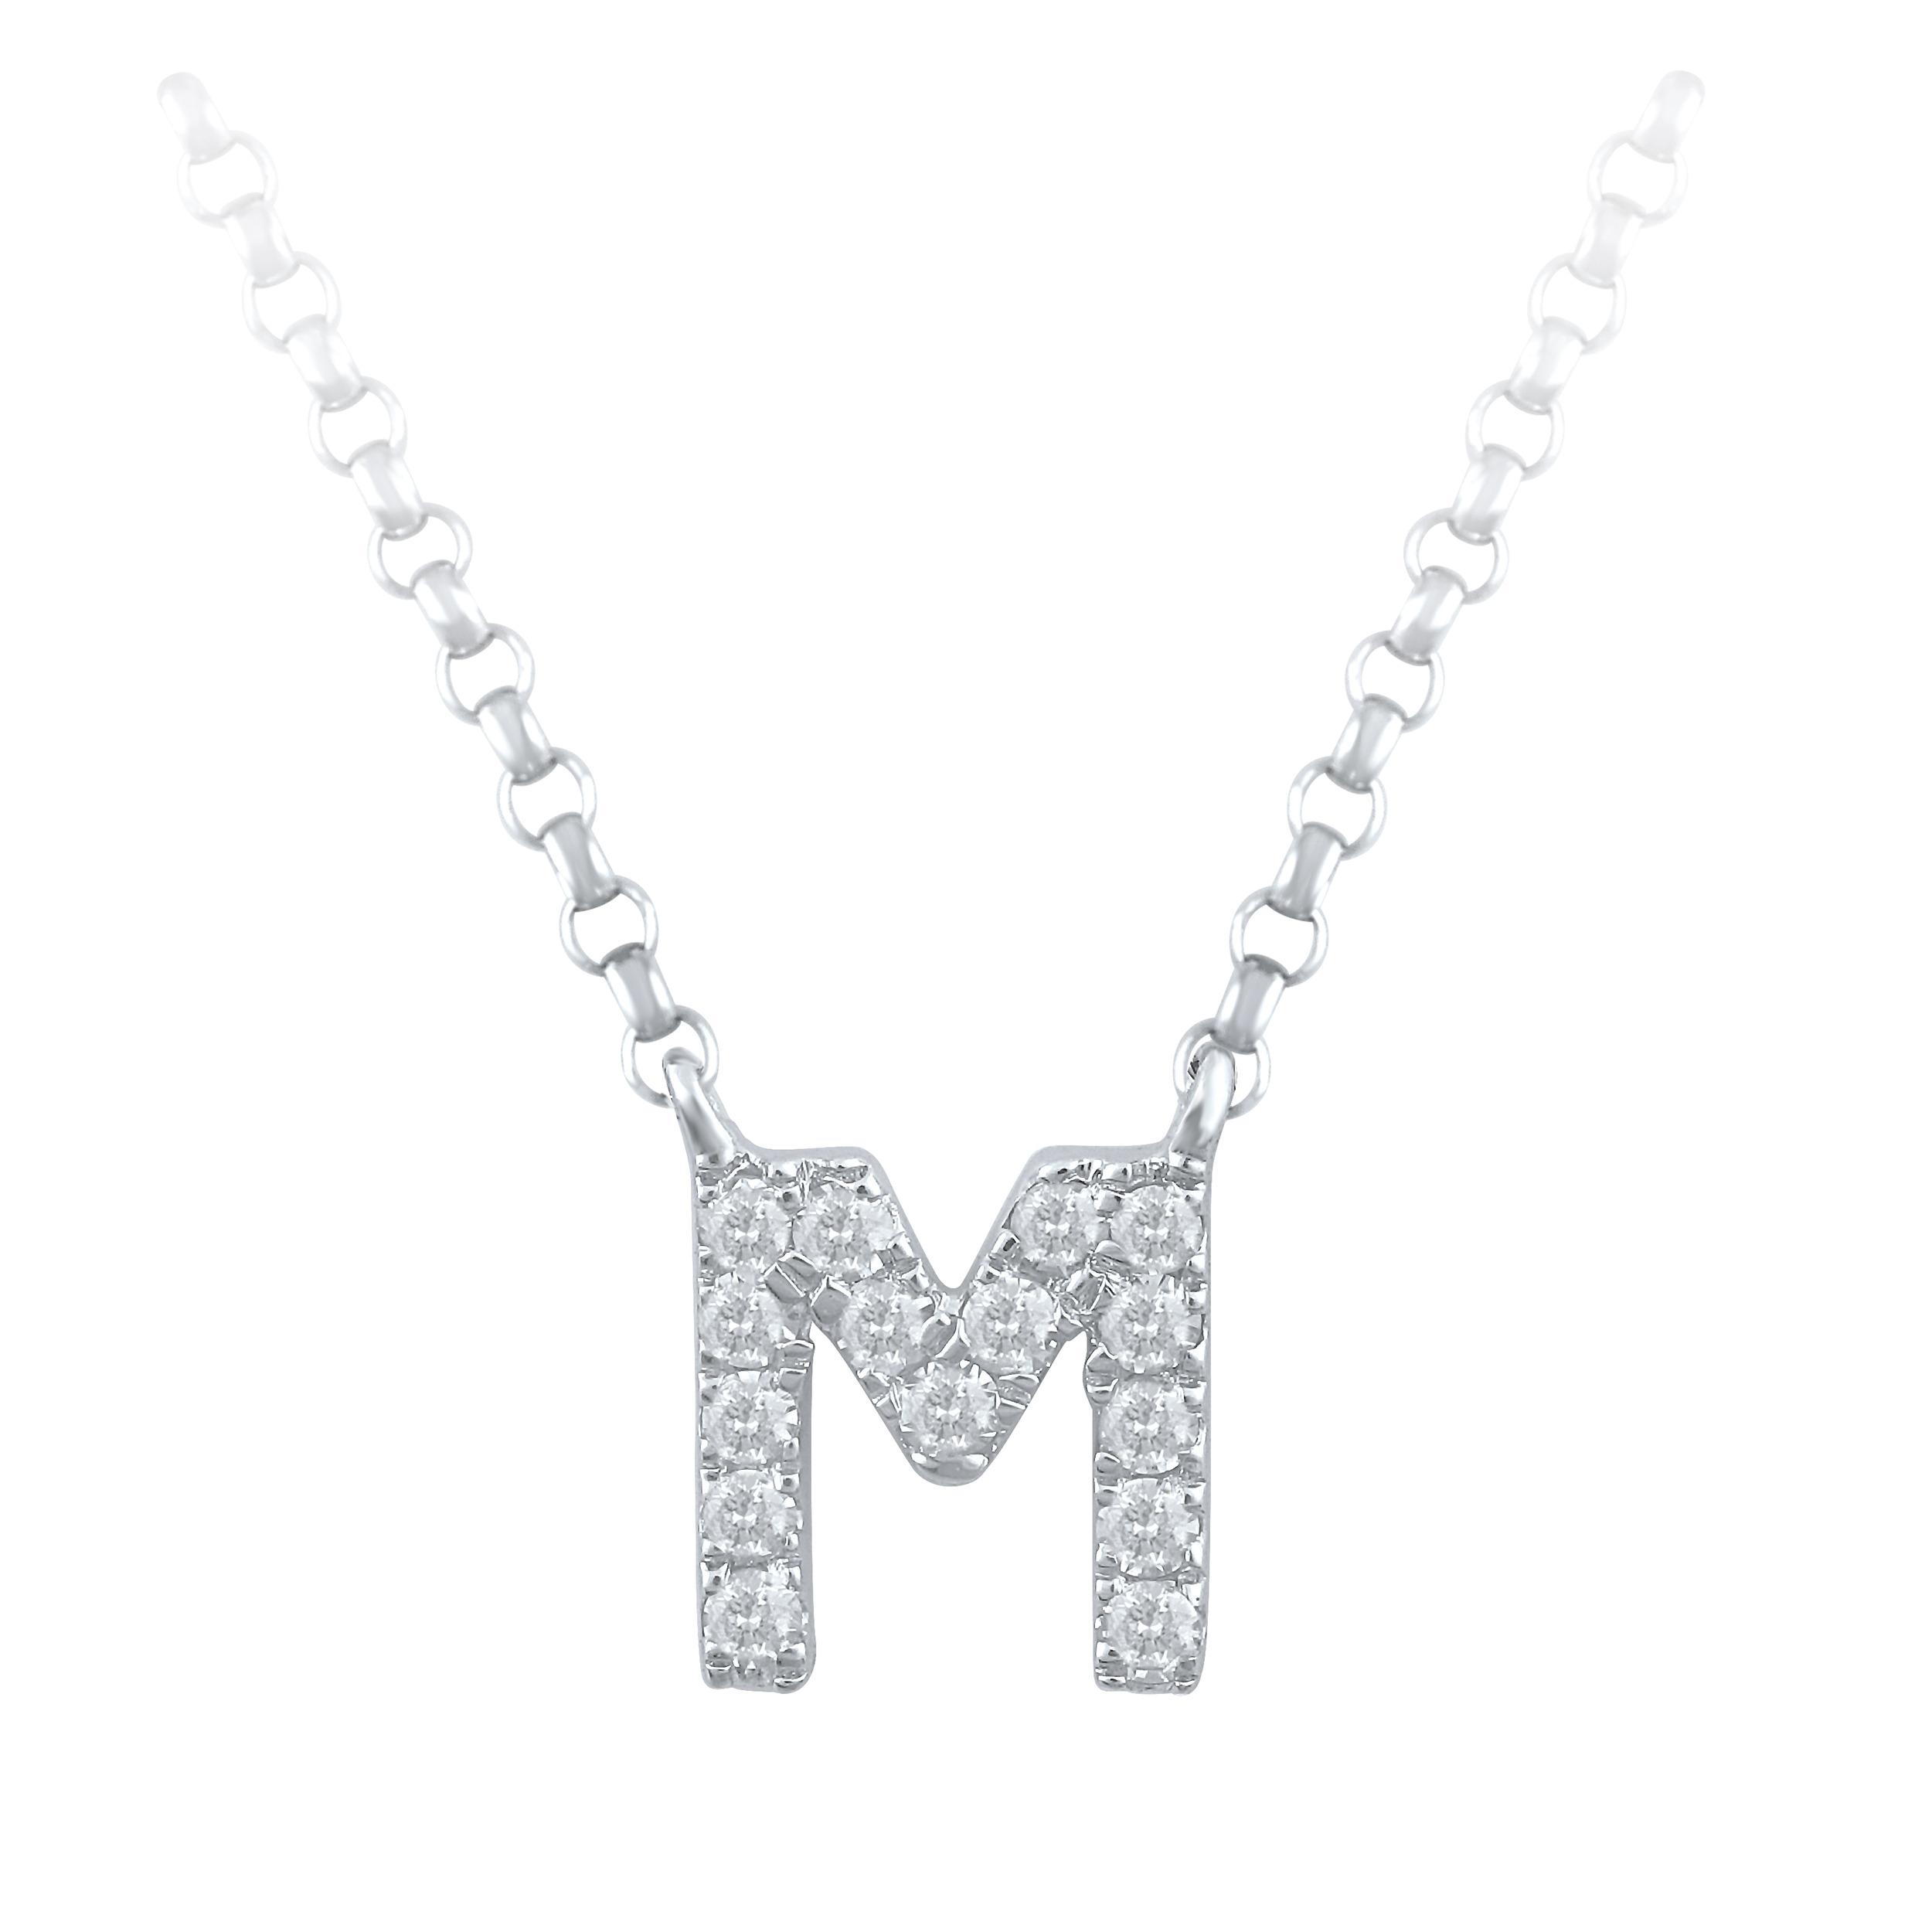 M' Initial Necklace with Diamonds in 10ct White Gold